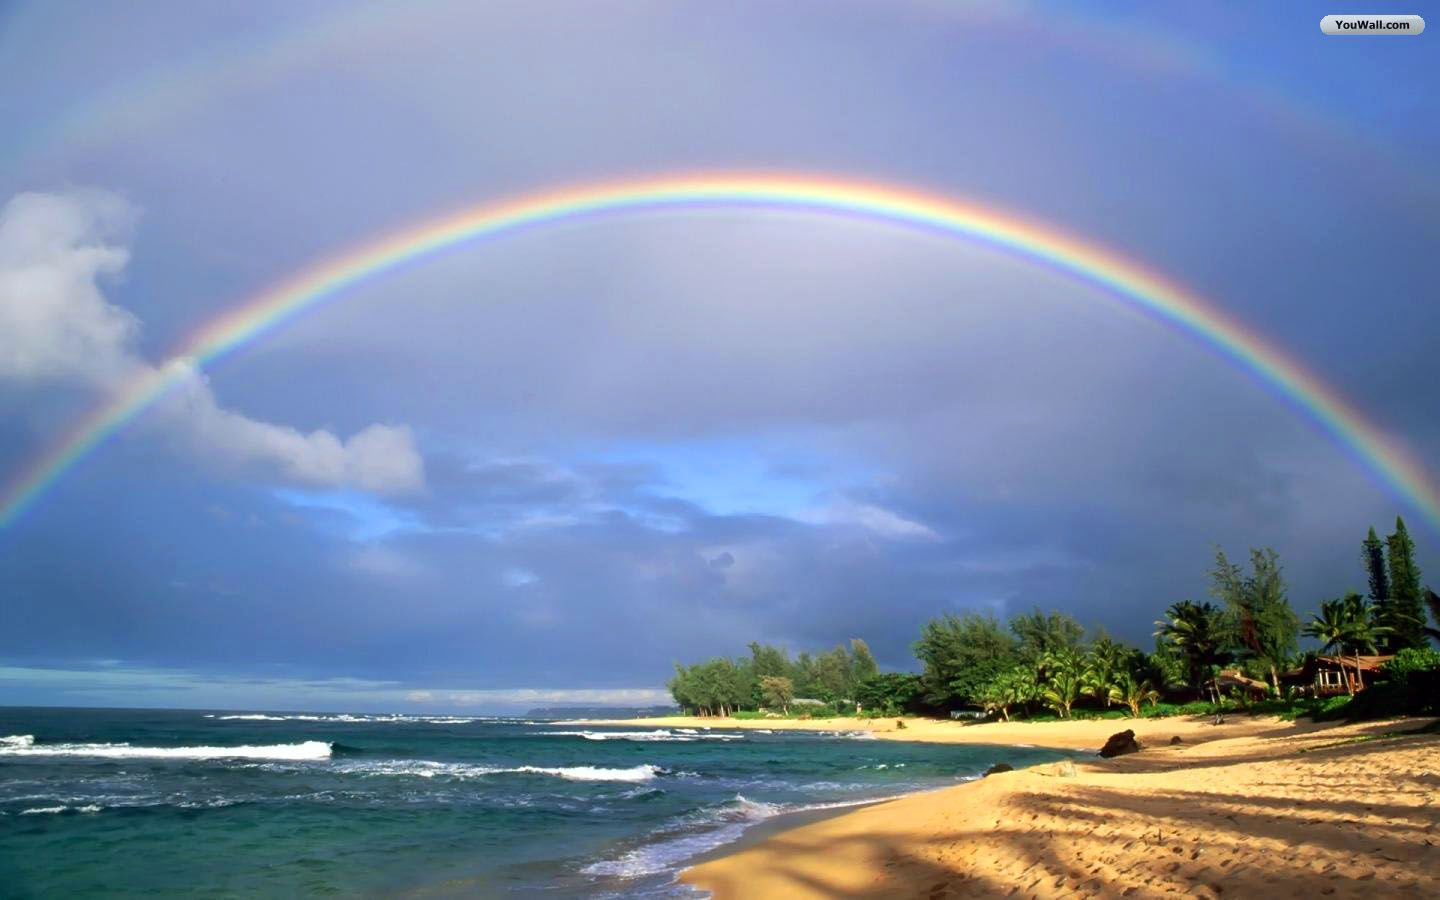 Of the worlds most beautiful rainbow photography examples